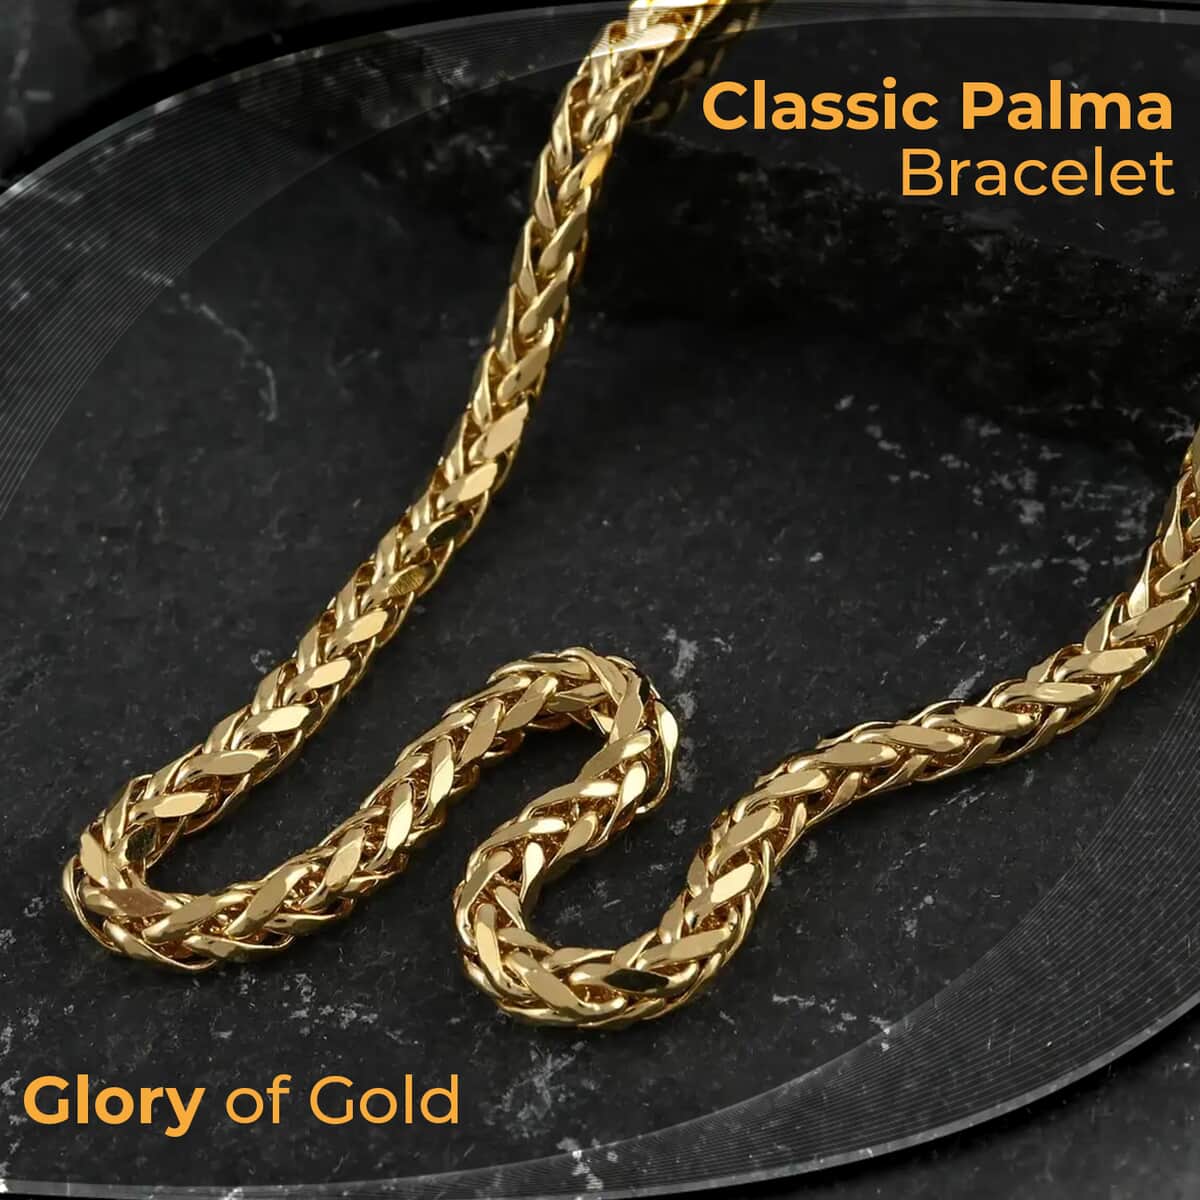 10K Yellow Gold Palma Chain Bracelet, Gold Chain Bracelet, Gold Jewelry, Gold Bracelet, Gold Gifts (8.50 In) 2.5mm, 2.70 Grams image number 1